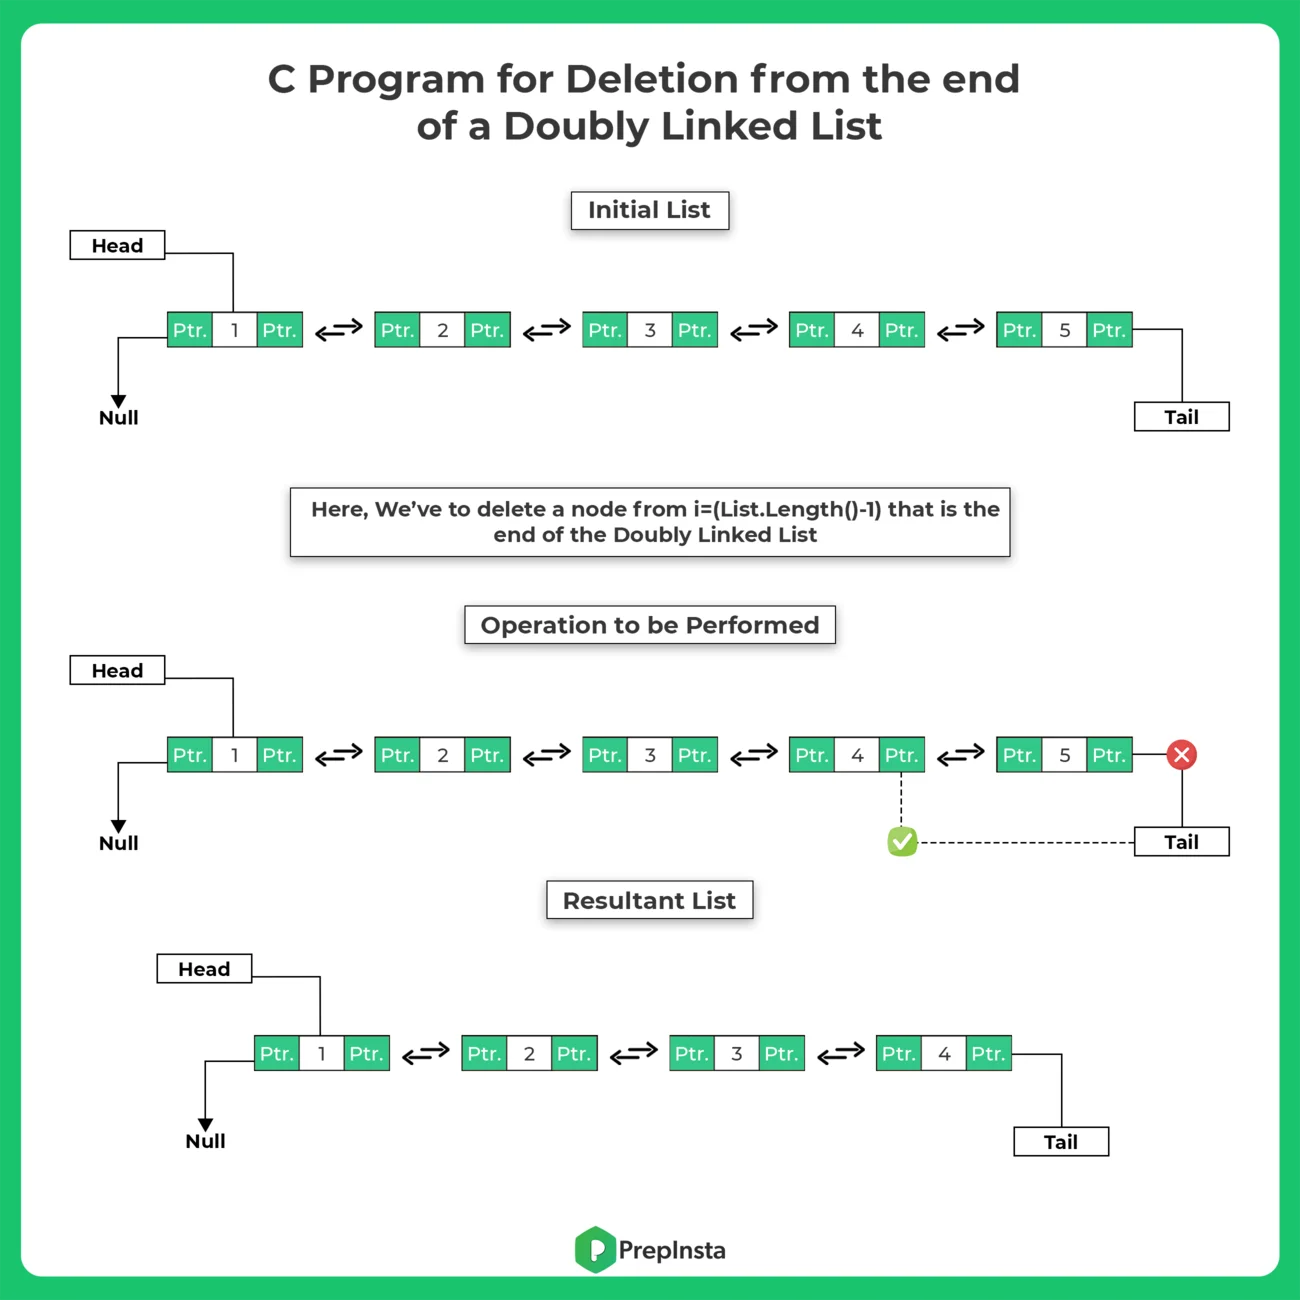 C Program for Deletion from the end in a Doubly Linked List